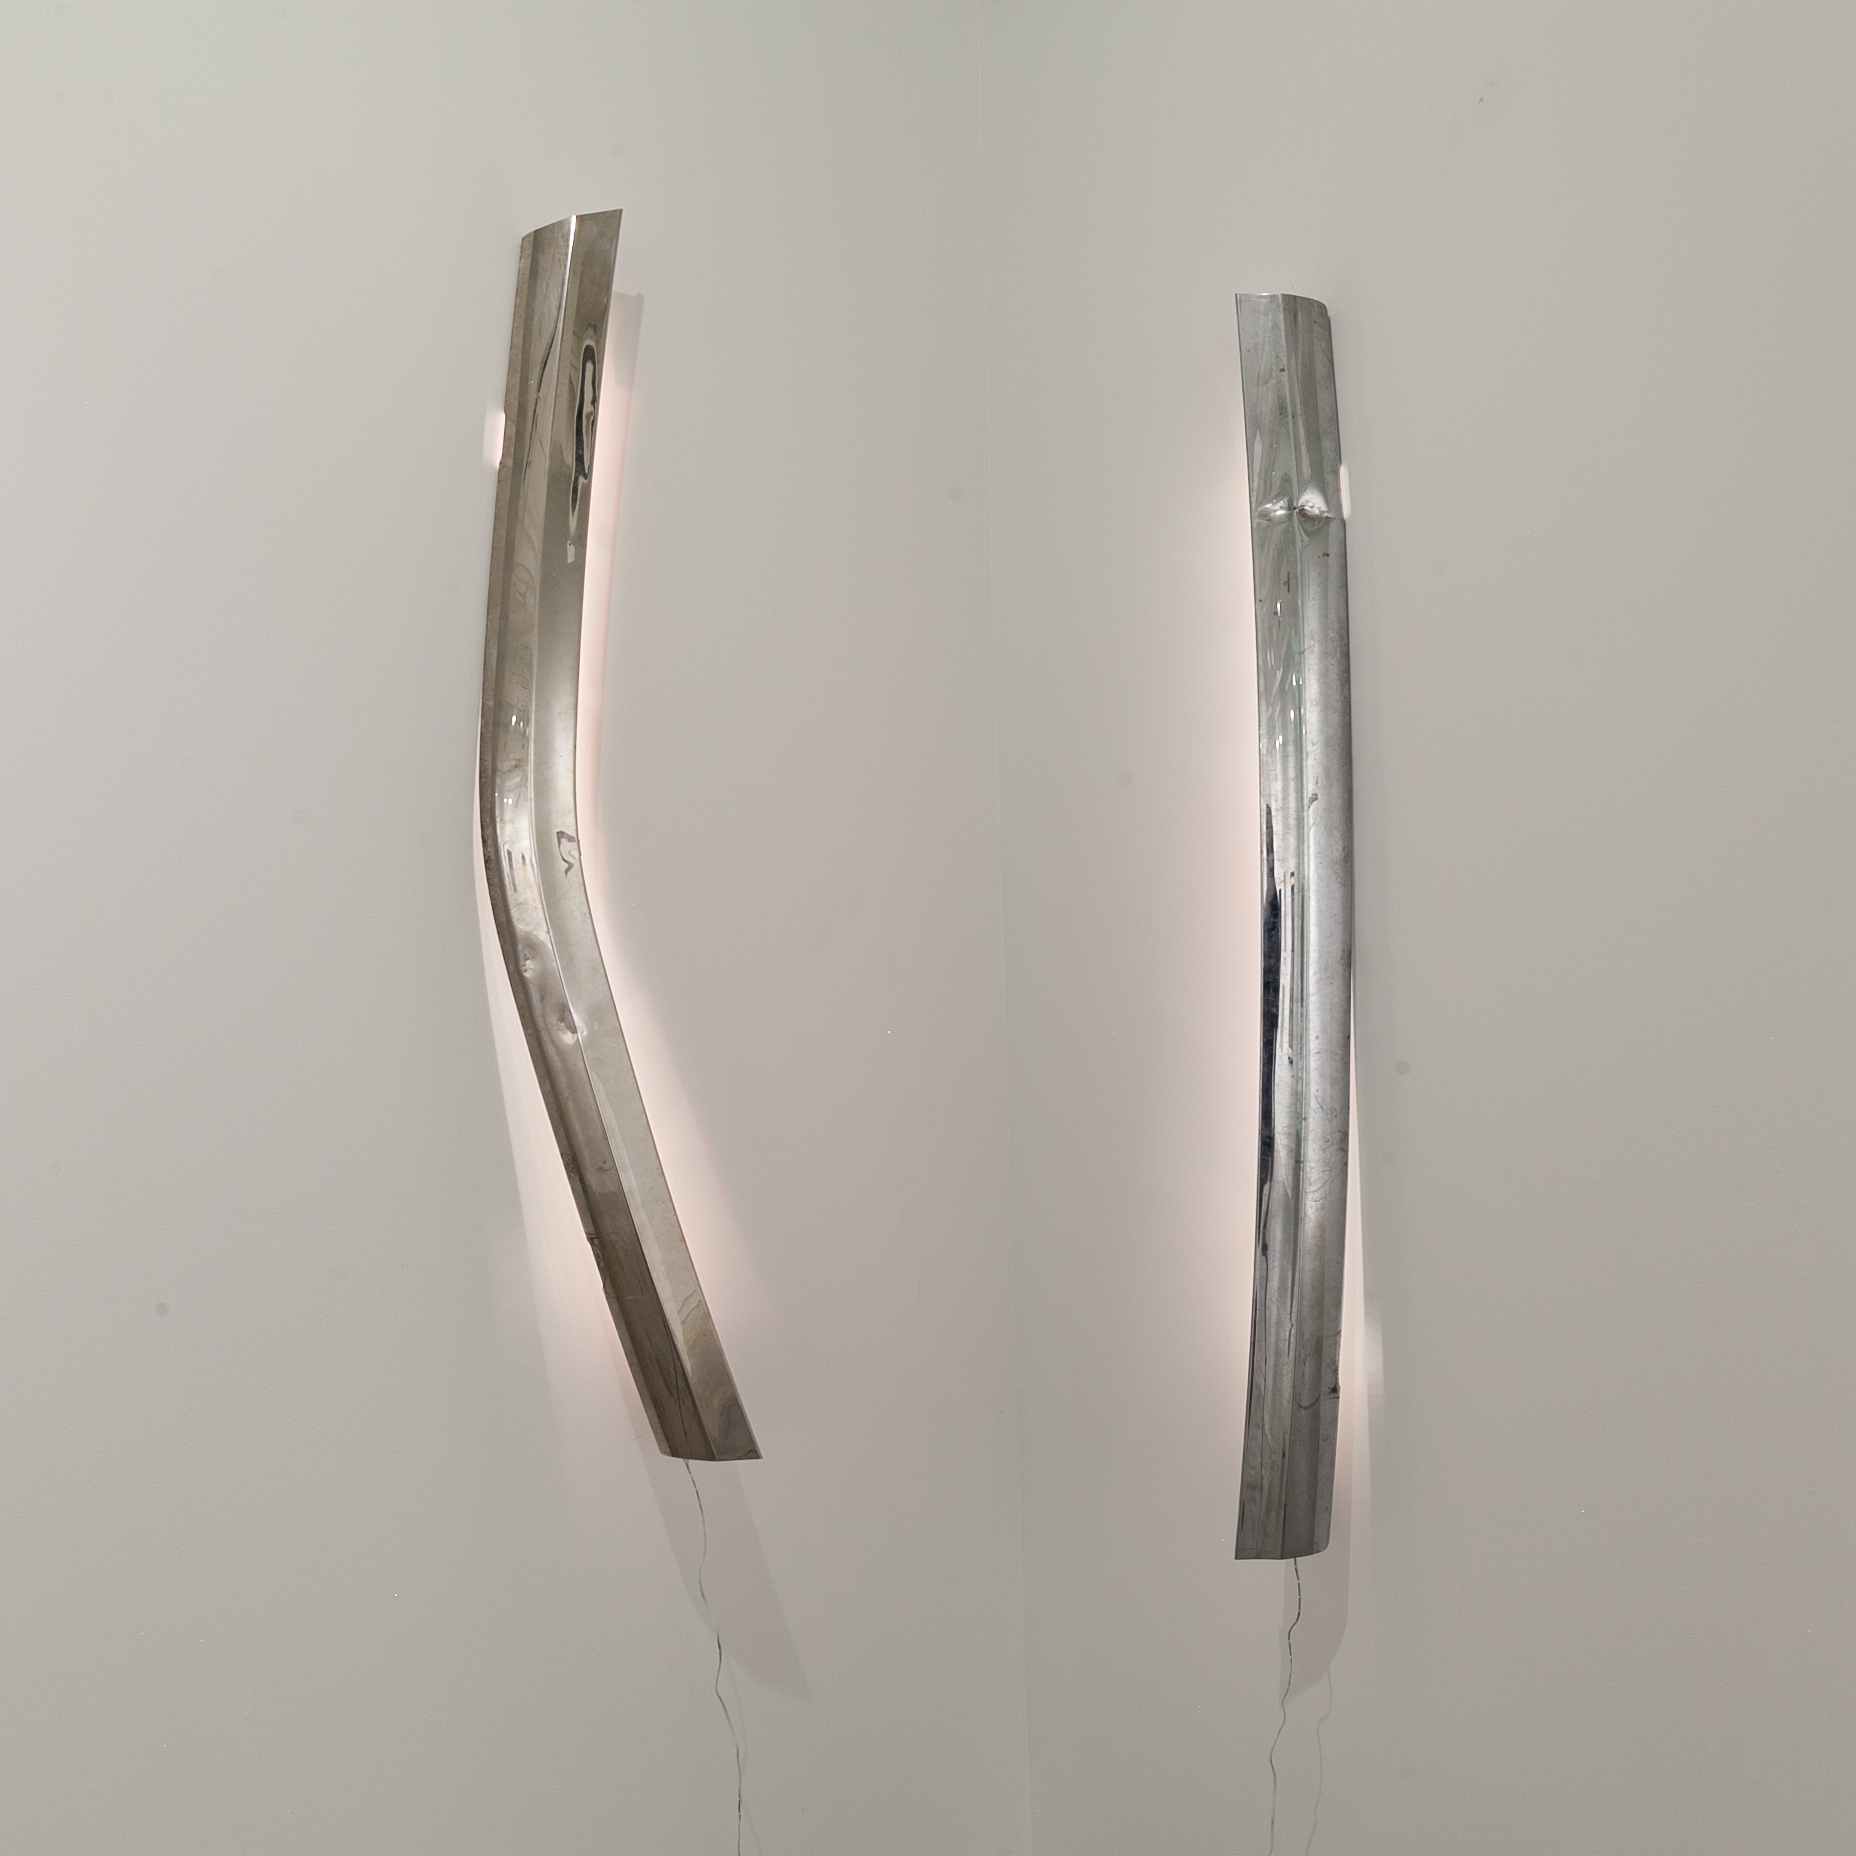  Tracy Treadwell (Memphis, TN)   It's a Dream in Here , 2018  Medium: Chrome bumpers and LED Lights  Dimensions: 66x58x5 inches each 